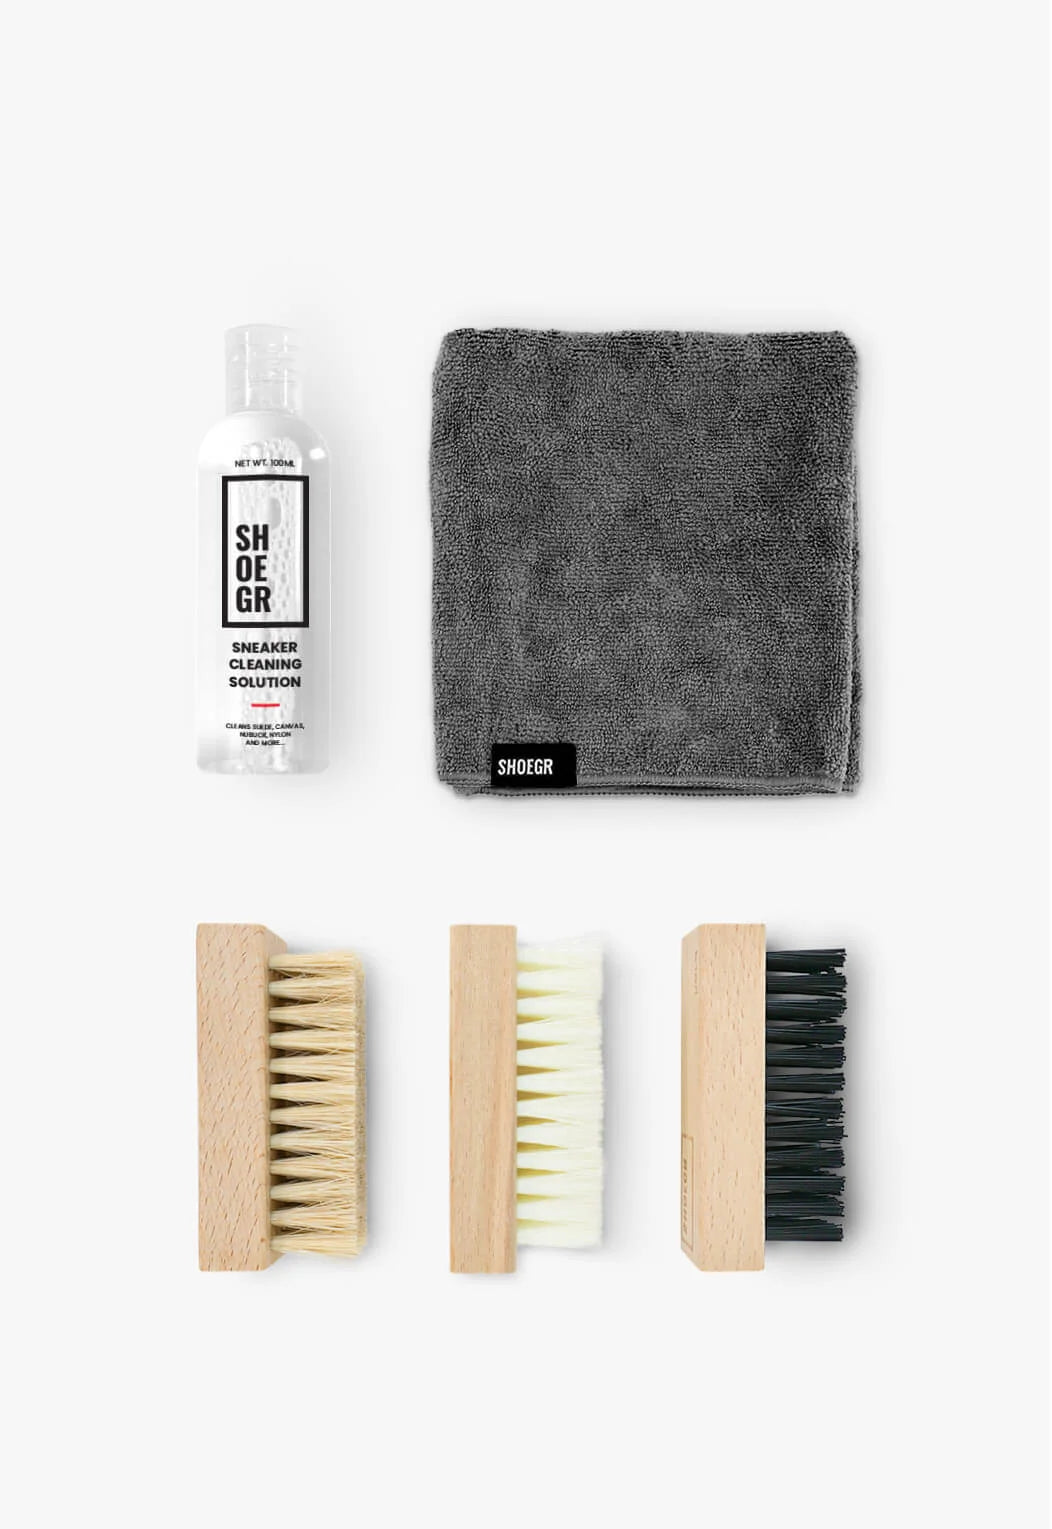 White Sneaker Cleaning Kit - Recover The White